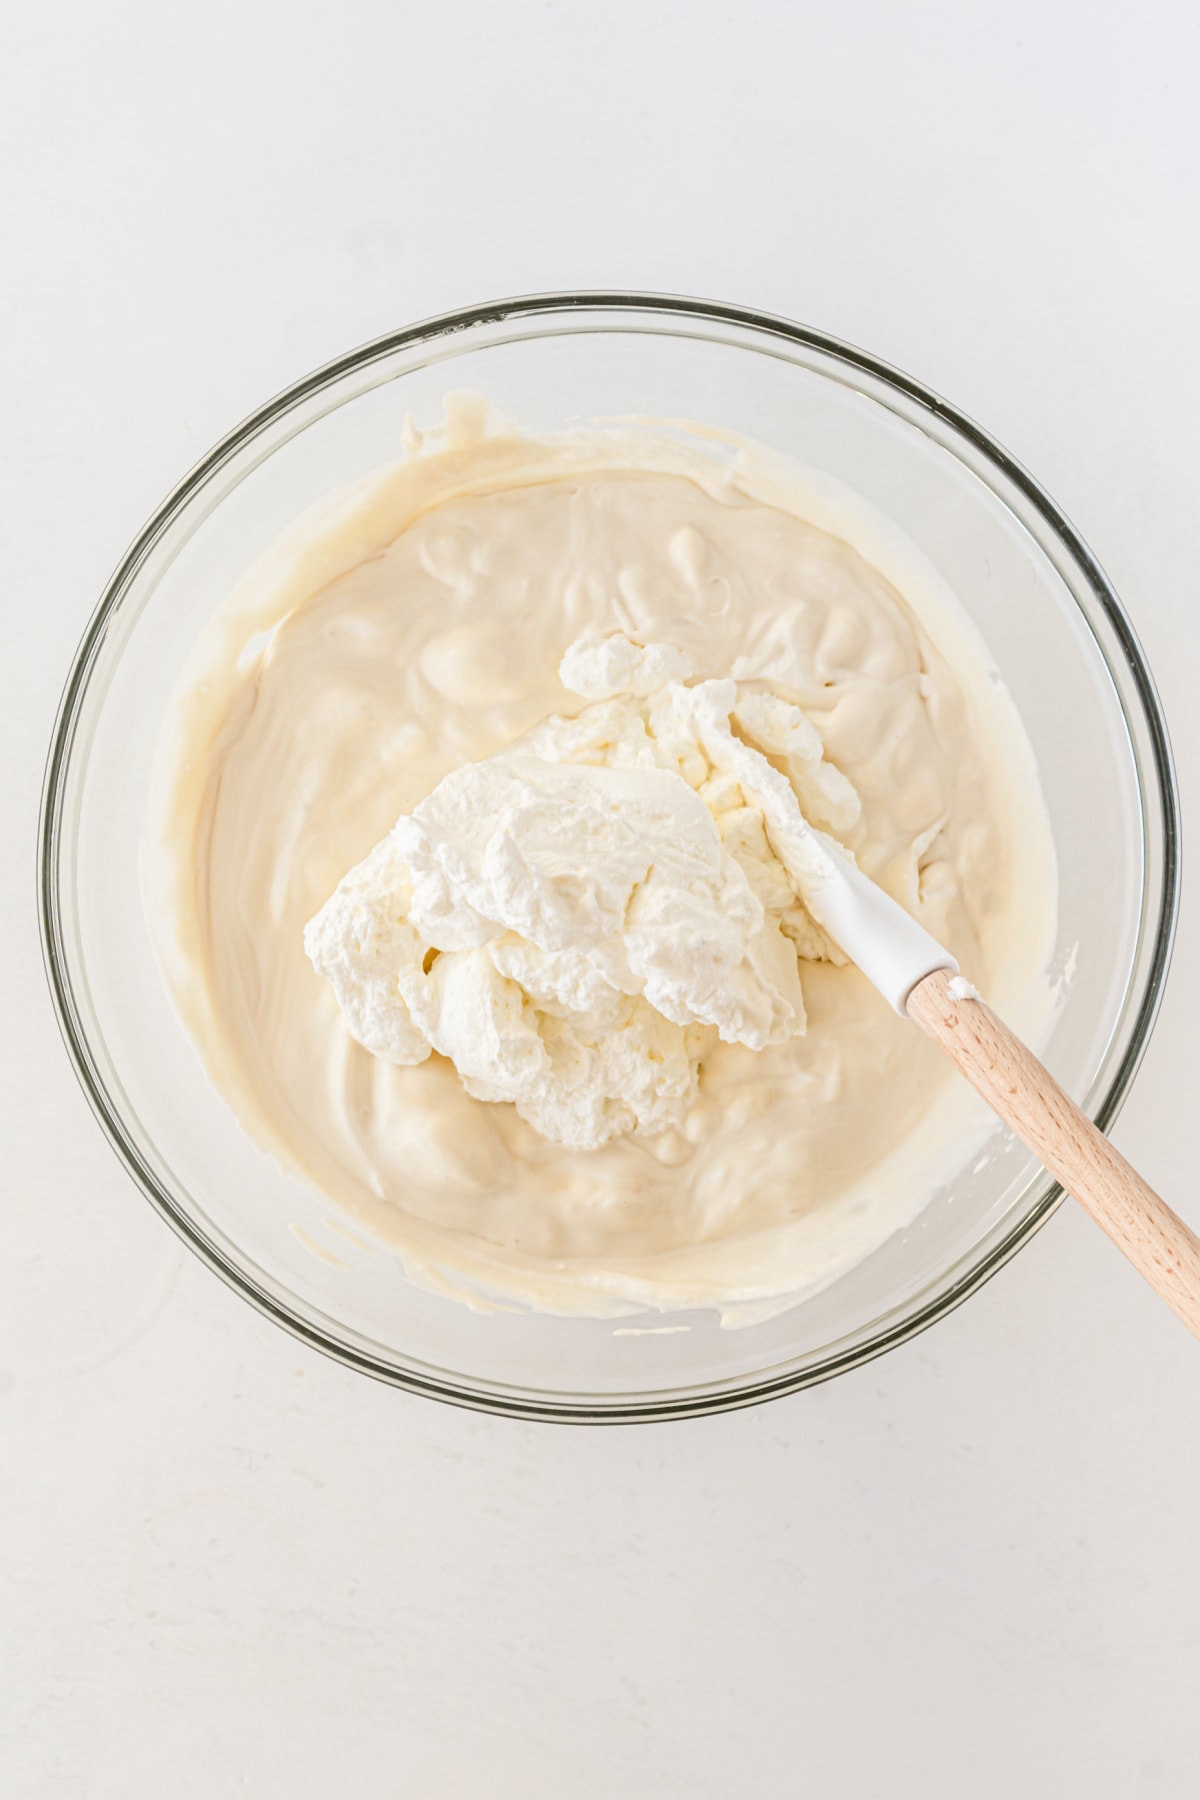 Whipped cream combined with condensed milk and vanilla